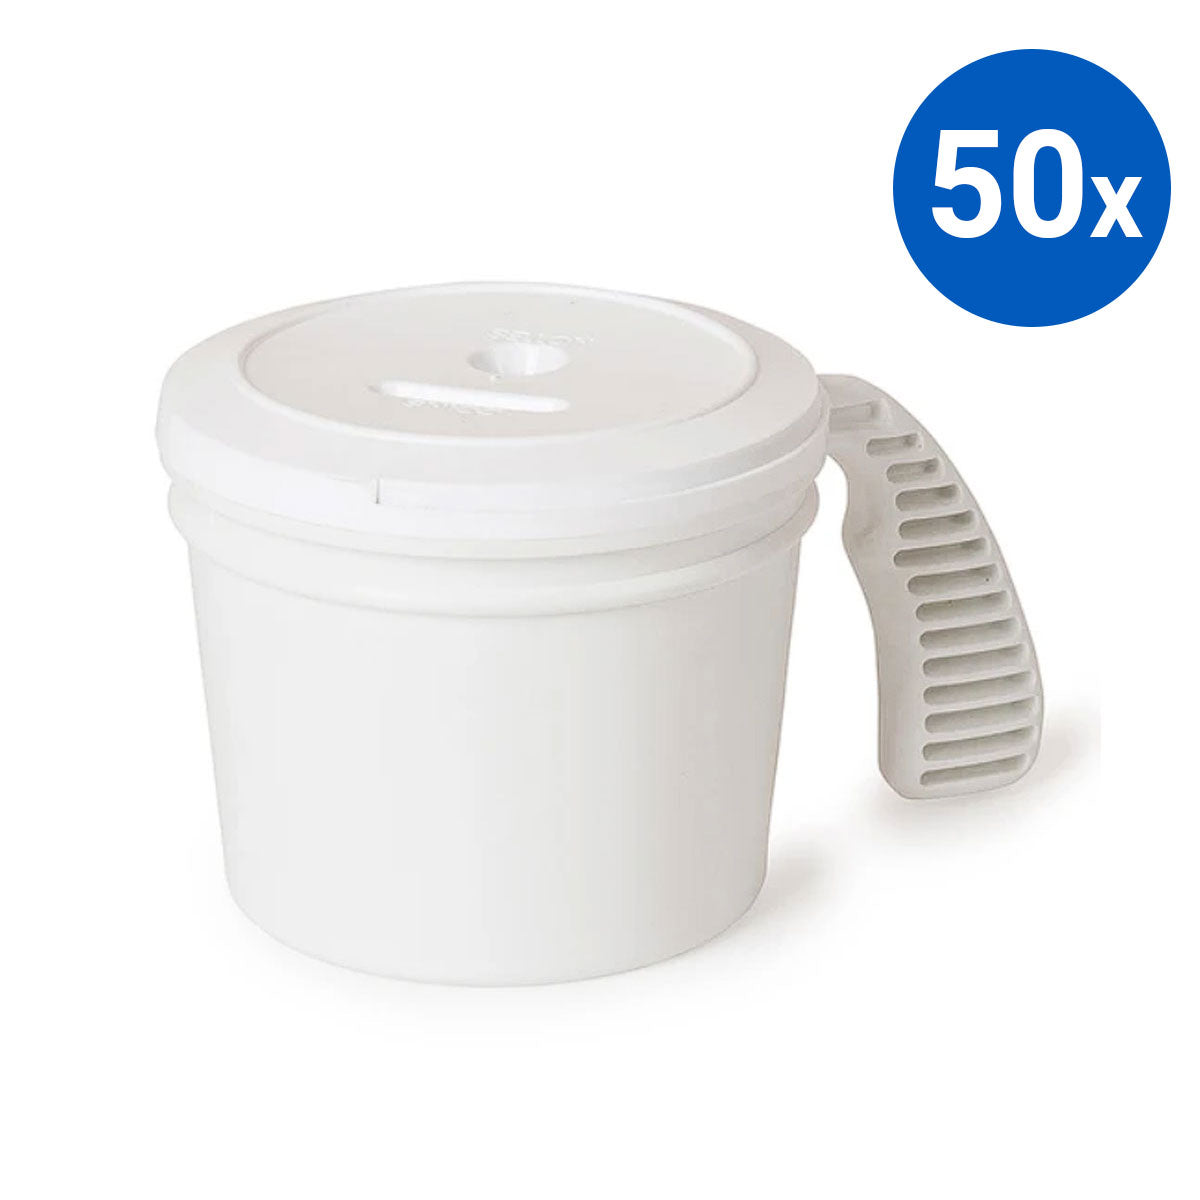 50x Collection Container Base and Standard Lid - White